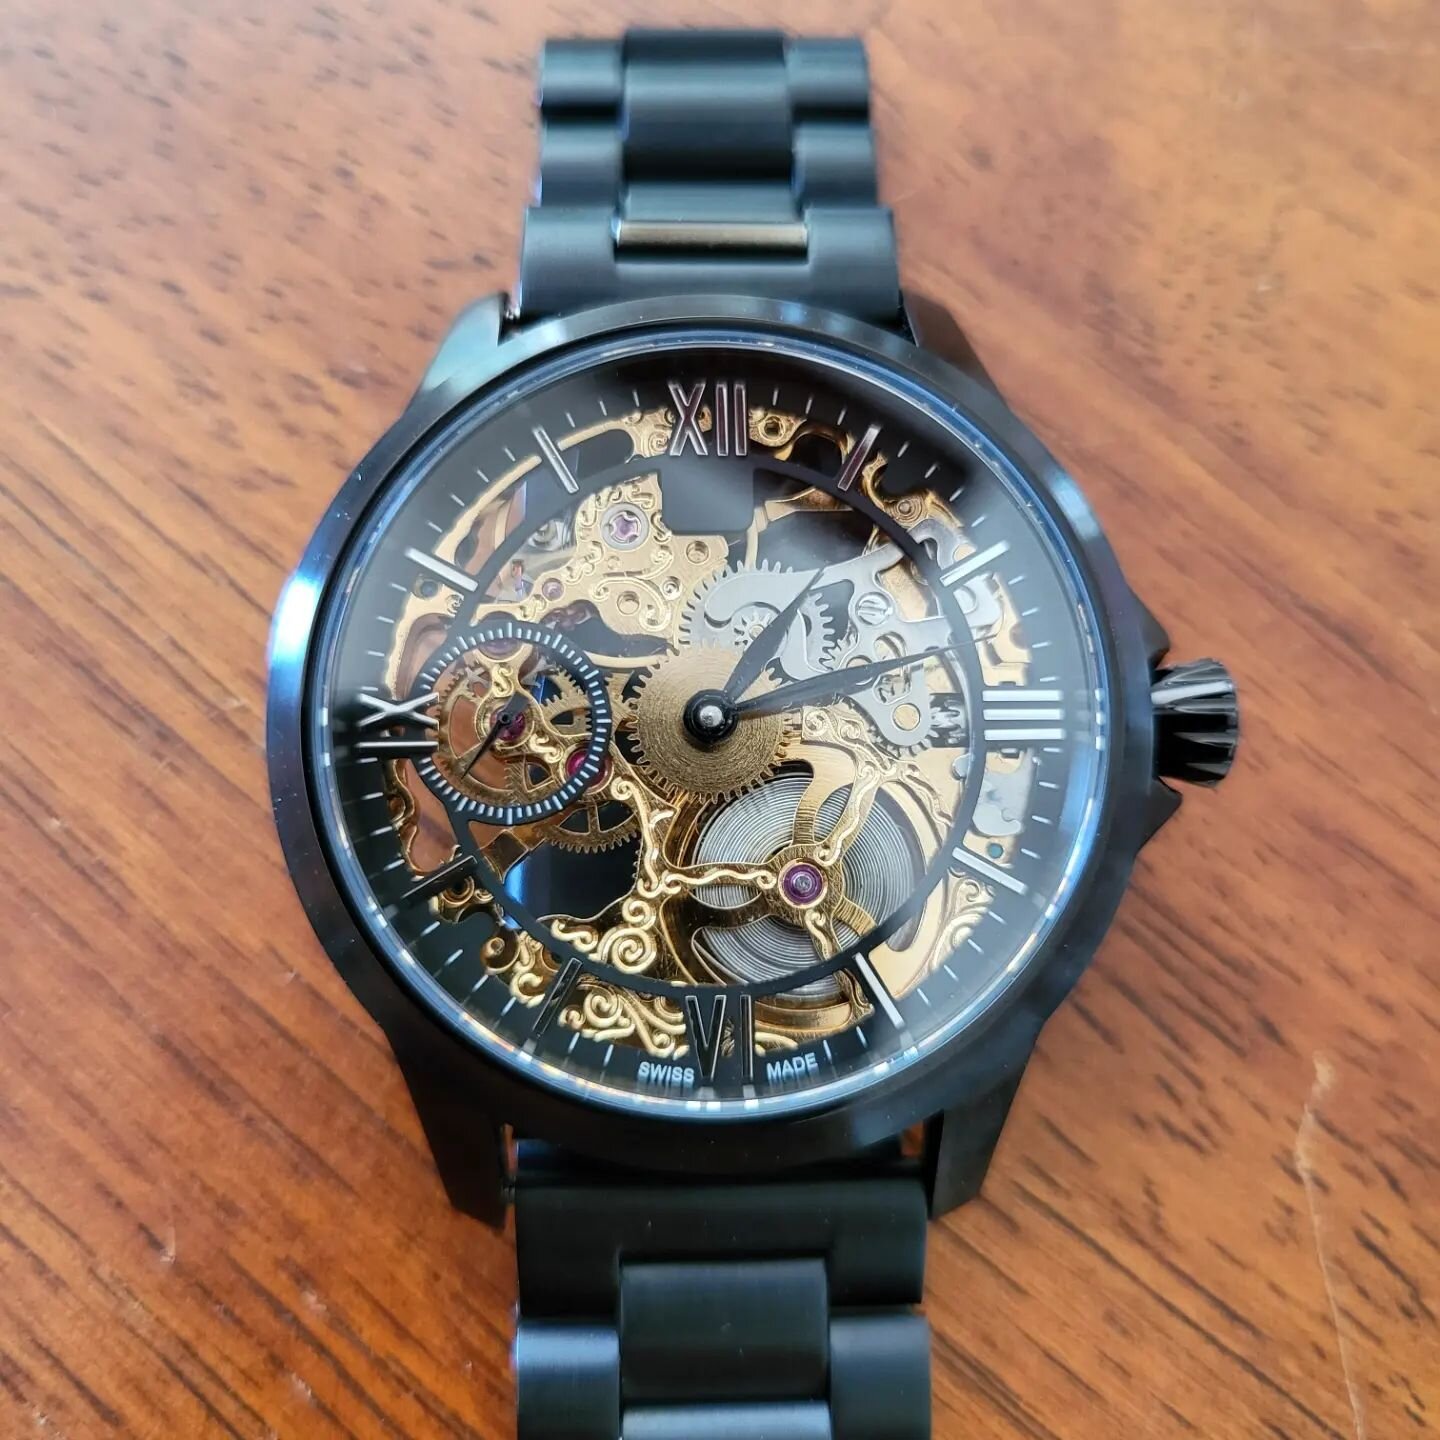 *SOLD*

🚨New watch for sale🚨
The Black and Gold Skeleton

Specs
45mm Black case with sapphire glass
22mm Black link metal band
Gold 6497 movement (serviced and regulated)
38mm Black roman numeral skeleton dial 
Black metal leaf style hands

If your